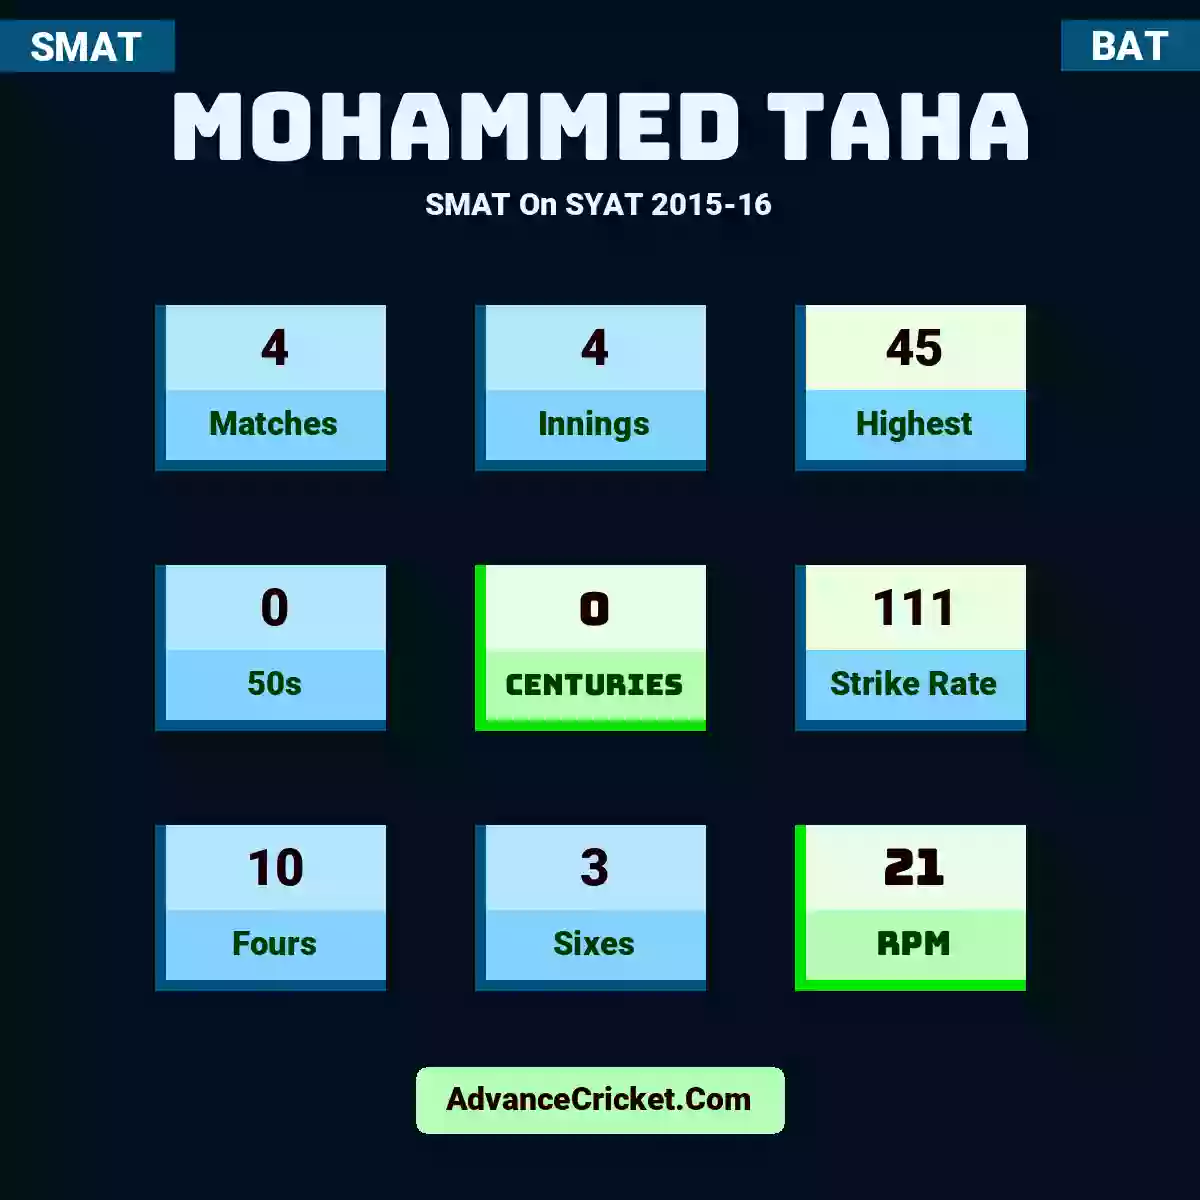 Mohammed Taha SMAT  On SYAT 2015-16, Mohammed Taha played 4 matches, scored 45 runs as highest, 0 half-centuries, and 0 centuries, with a strike rate of 111. M.Taha hit 10 fours and 3 sixes, with an RPM of 21.